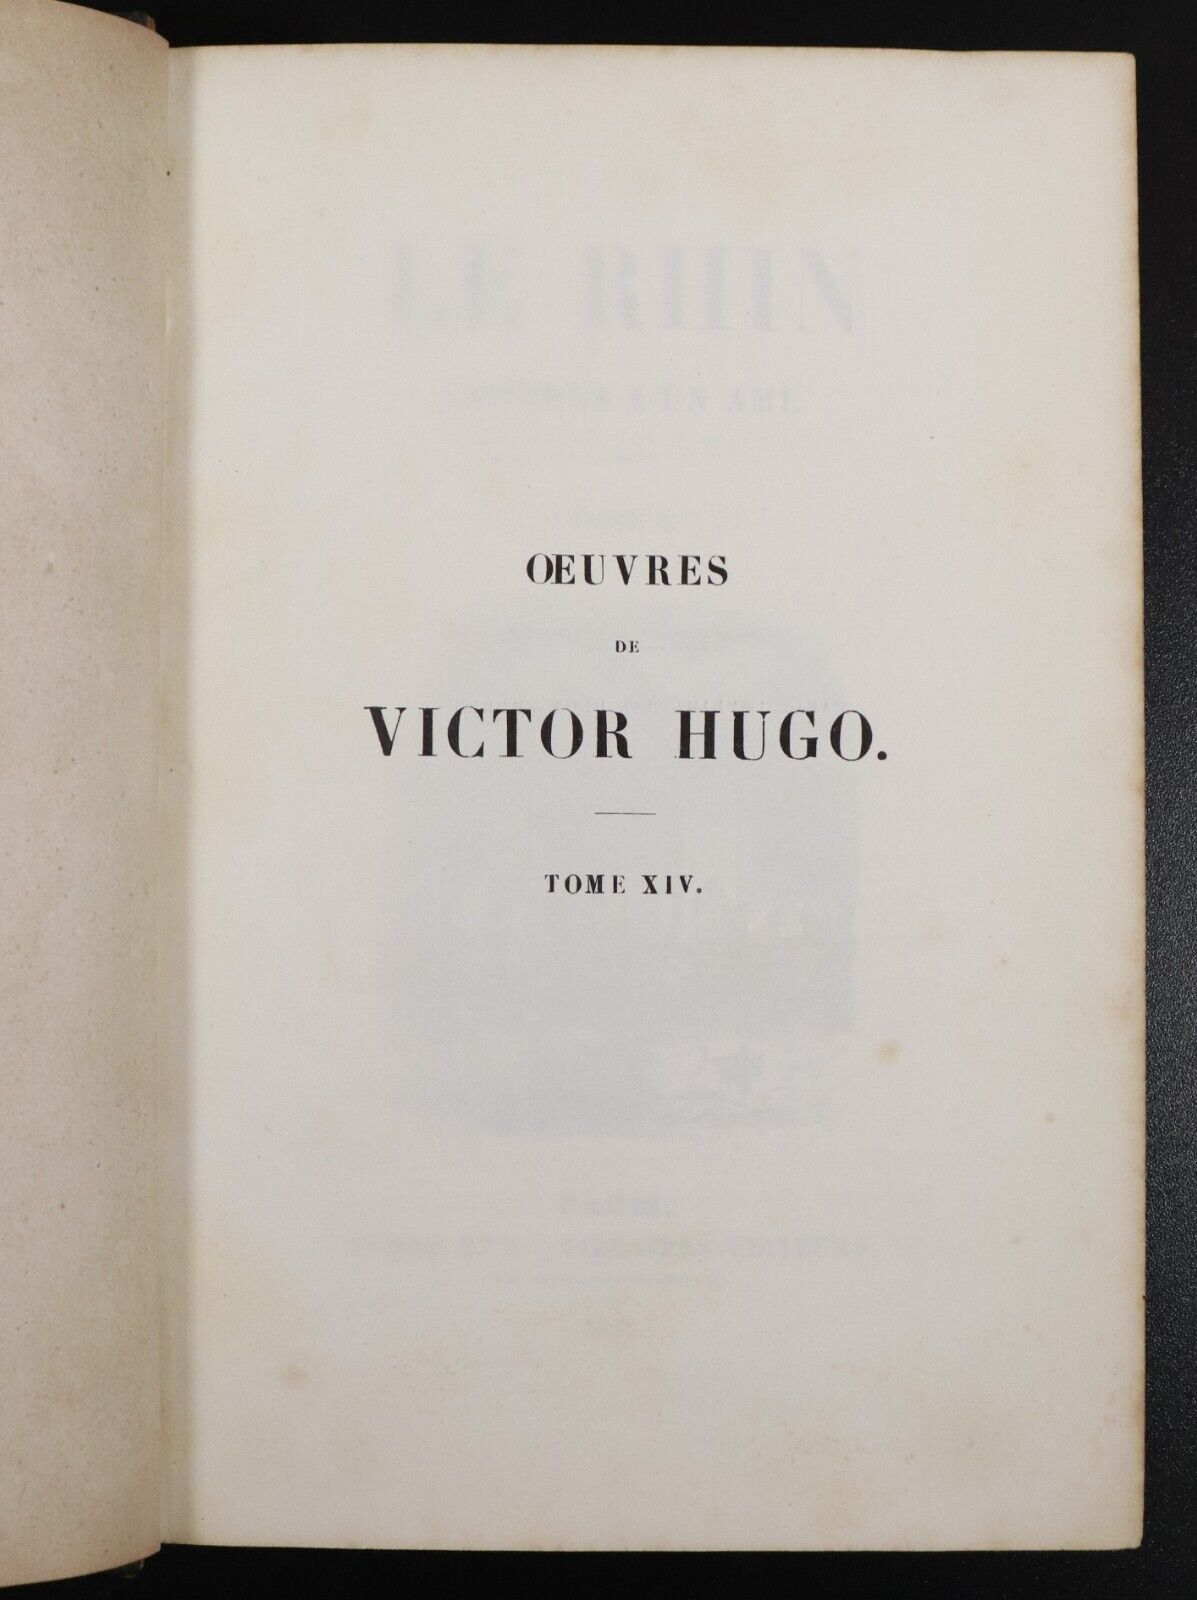 1846 Oeuvres Victor Hugo Le Rhin Lettres A Un Ami Antiquarian French Book - 0